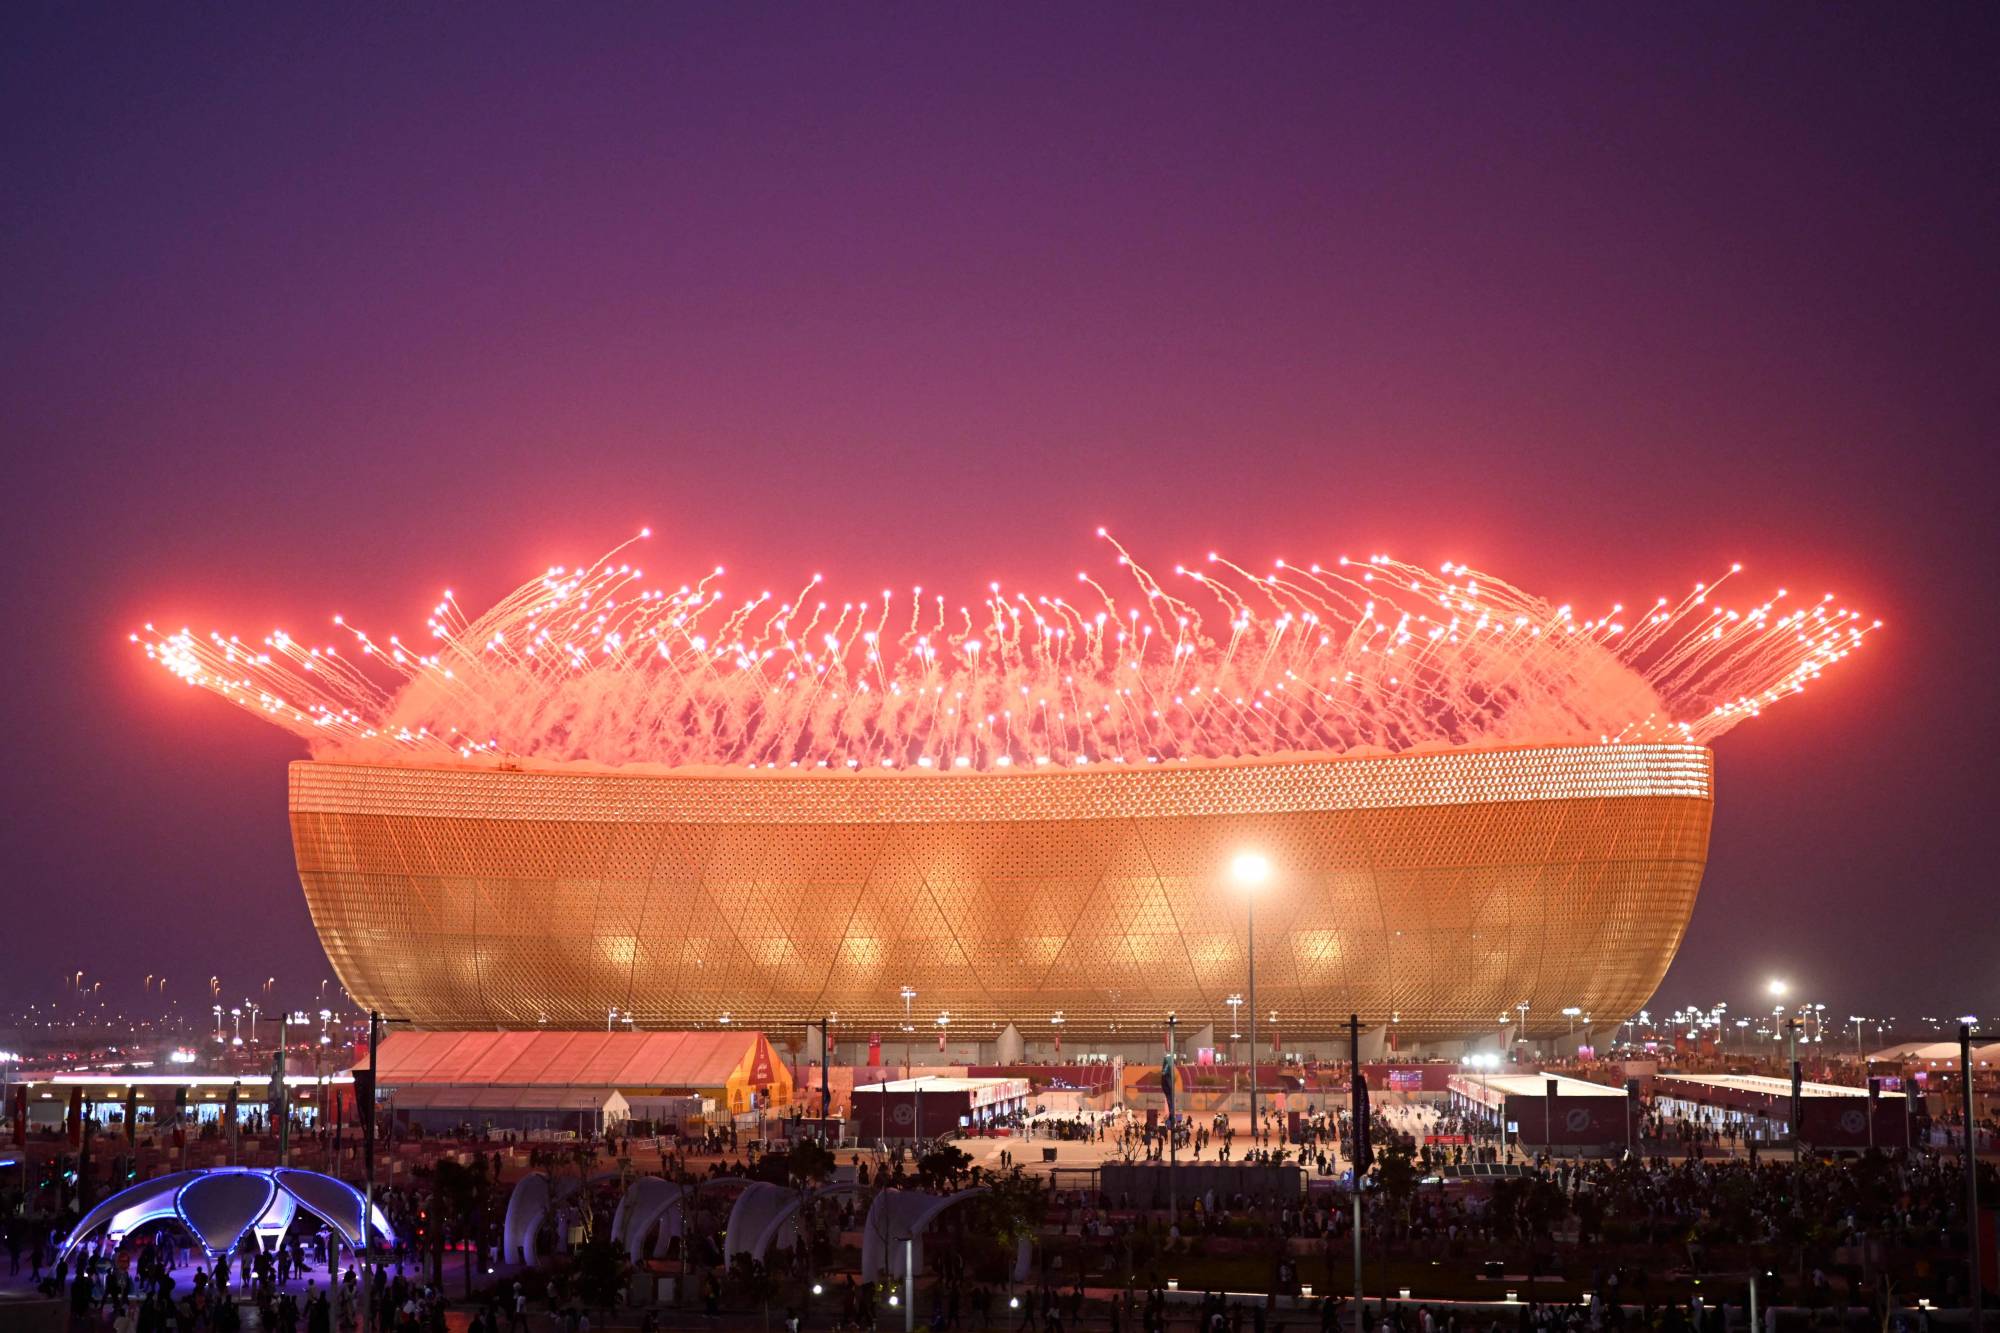 The 2022 FIFA World Cup is among a number of marquee sporting events hosted recently by Qatar, with several more scheduled in the coming years. | AFP-JIJI